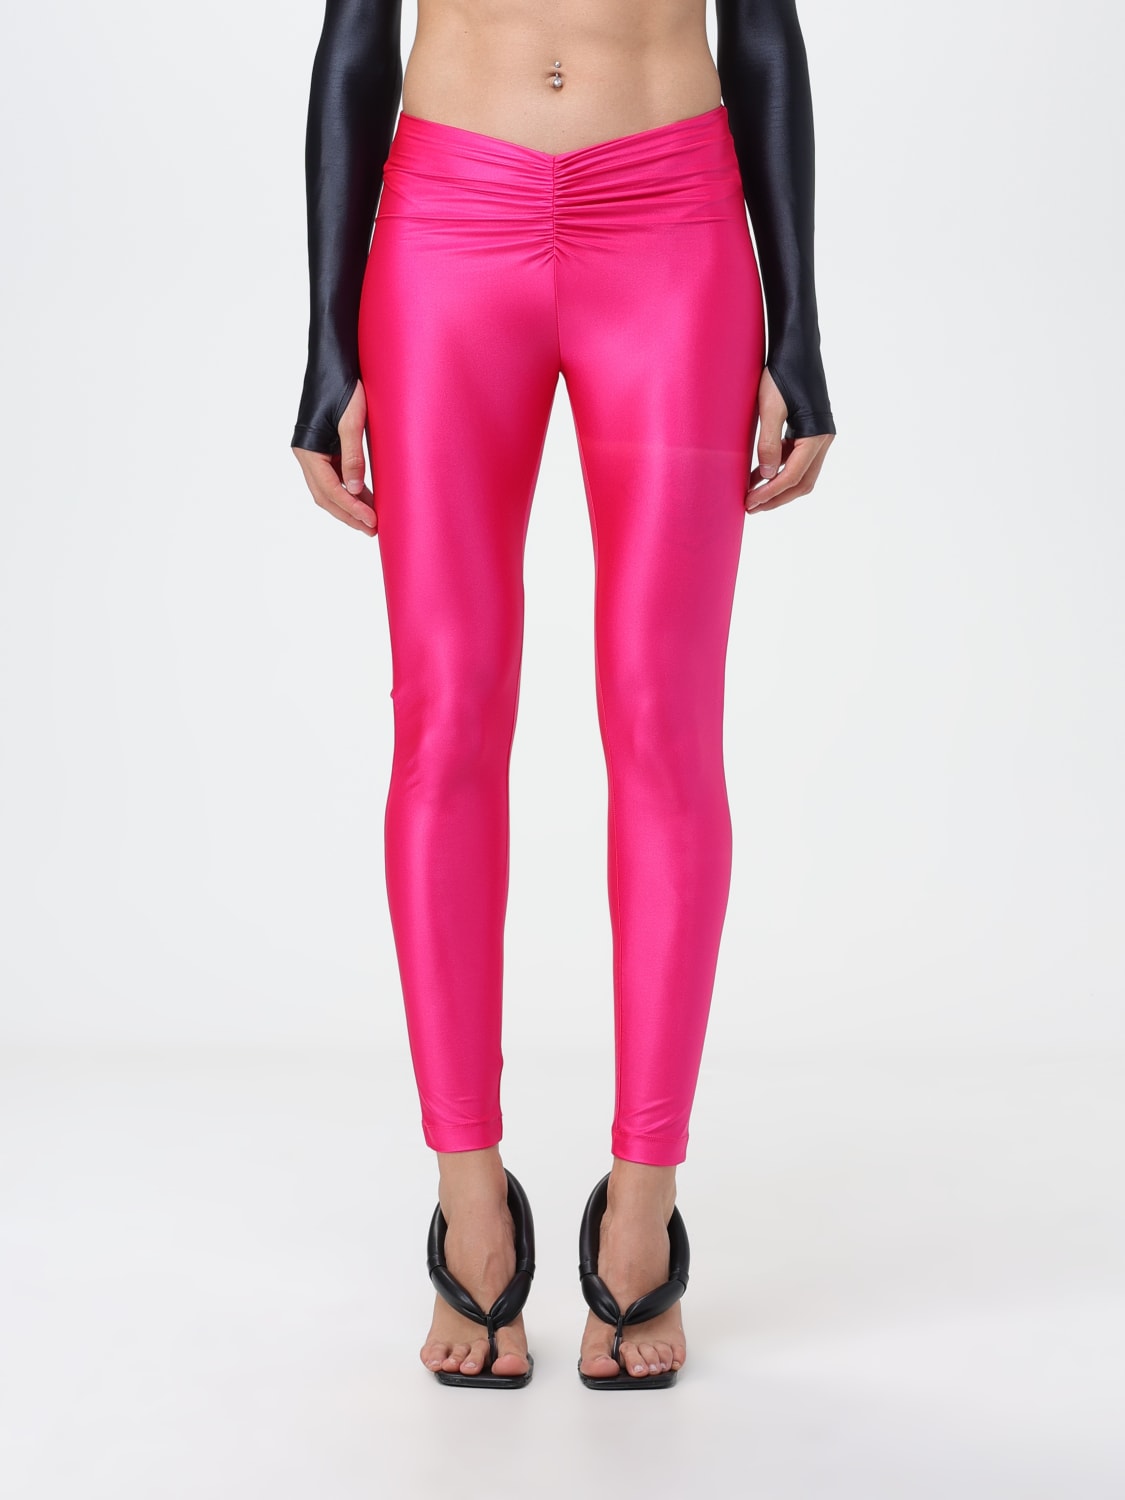 Versace Jeans Couture leggings in stretch fabric